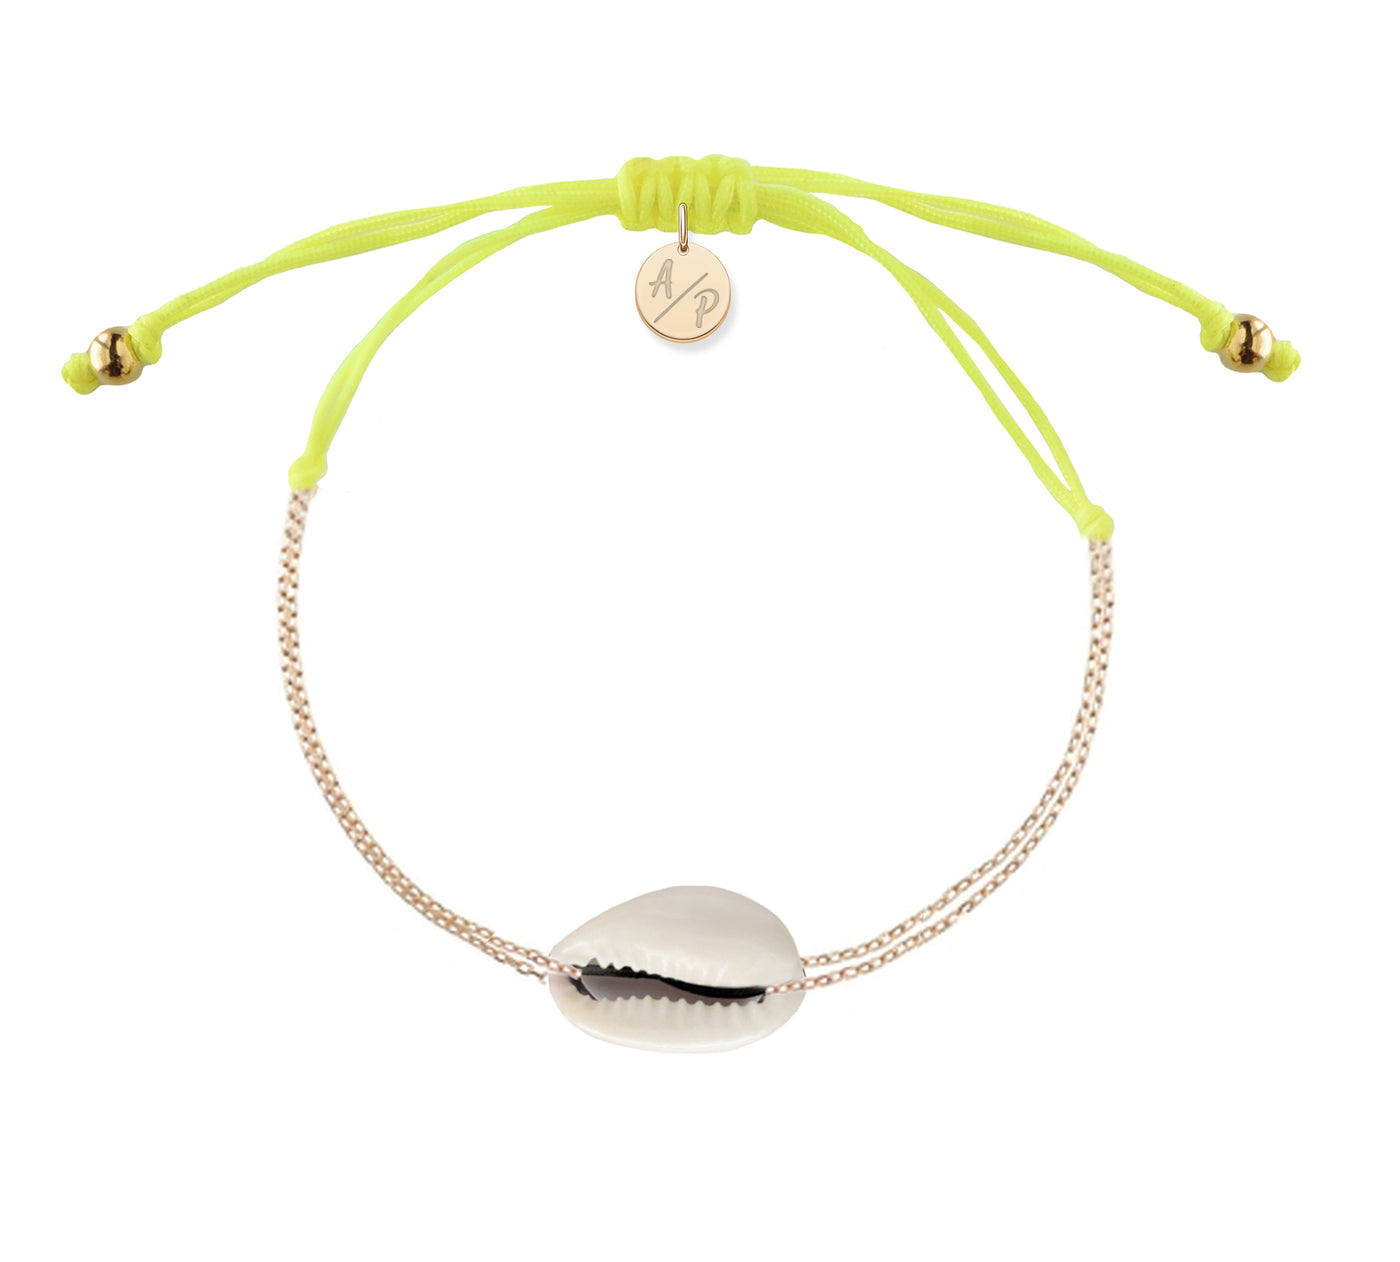 Mini Natural Shell Chain Bracelet - 14k Gold Filled on Colored Cord